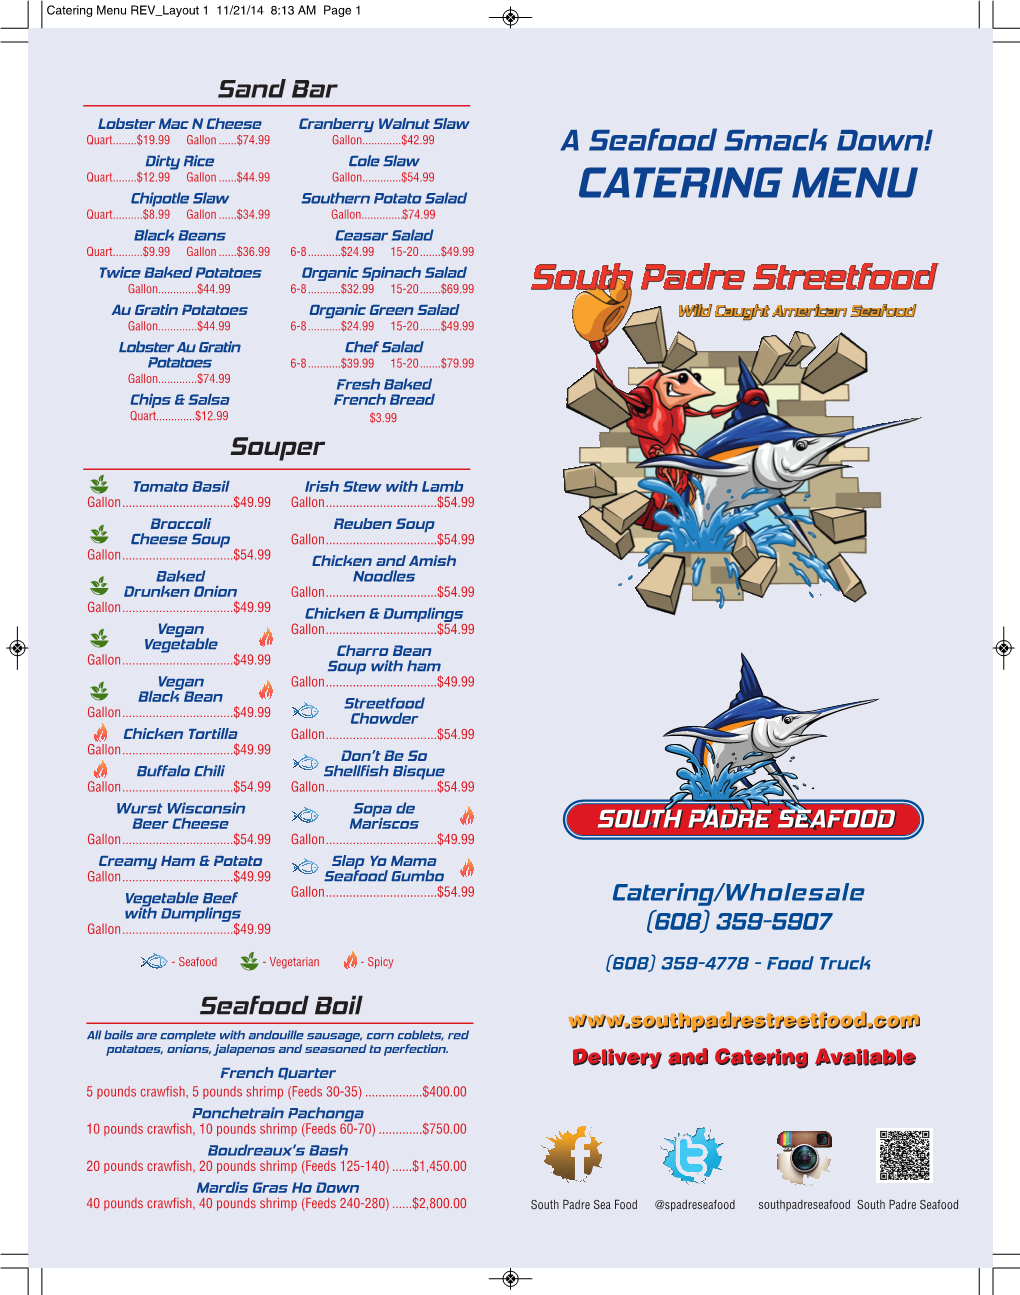 Catering Menu REV Layout 1 11/21/14 8:13 AM Page 1